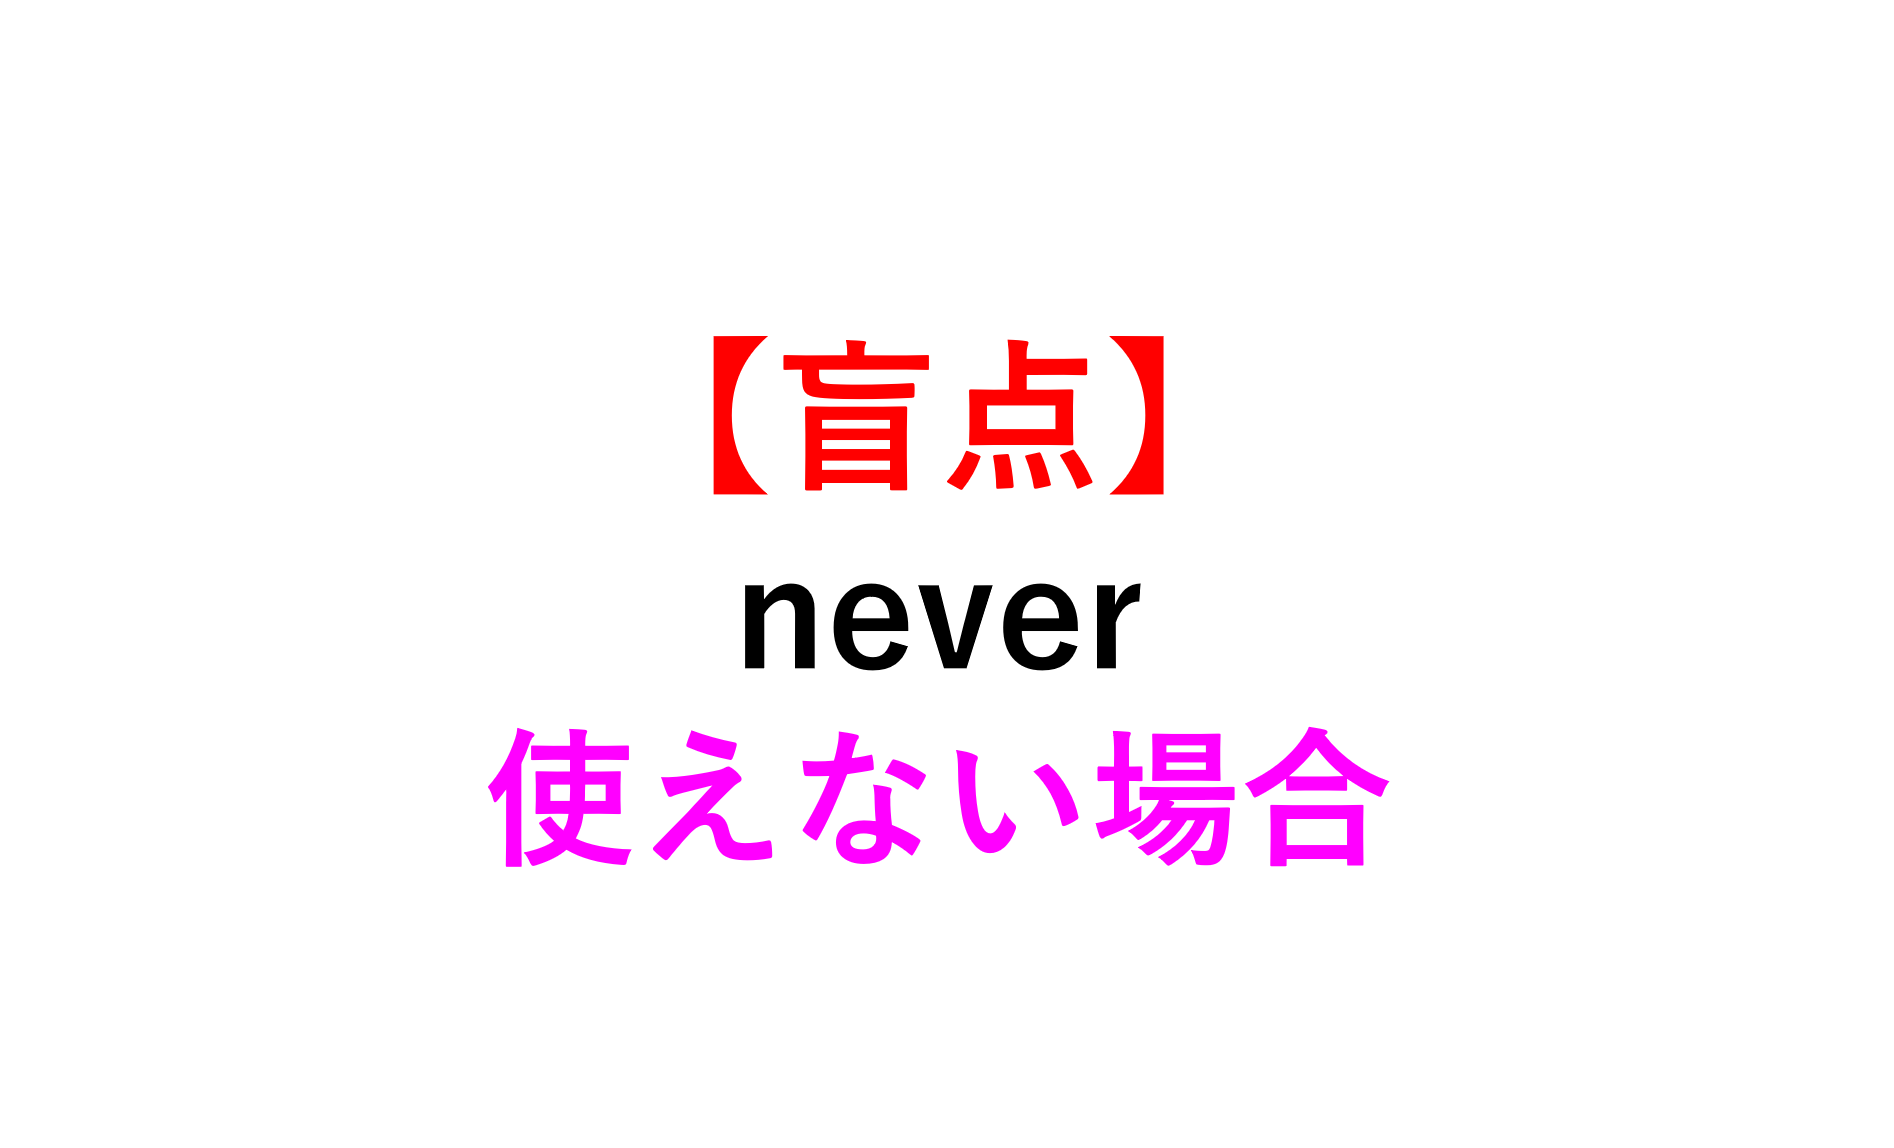 Neverは何詞？